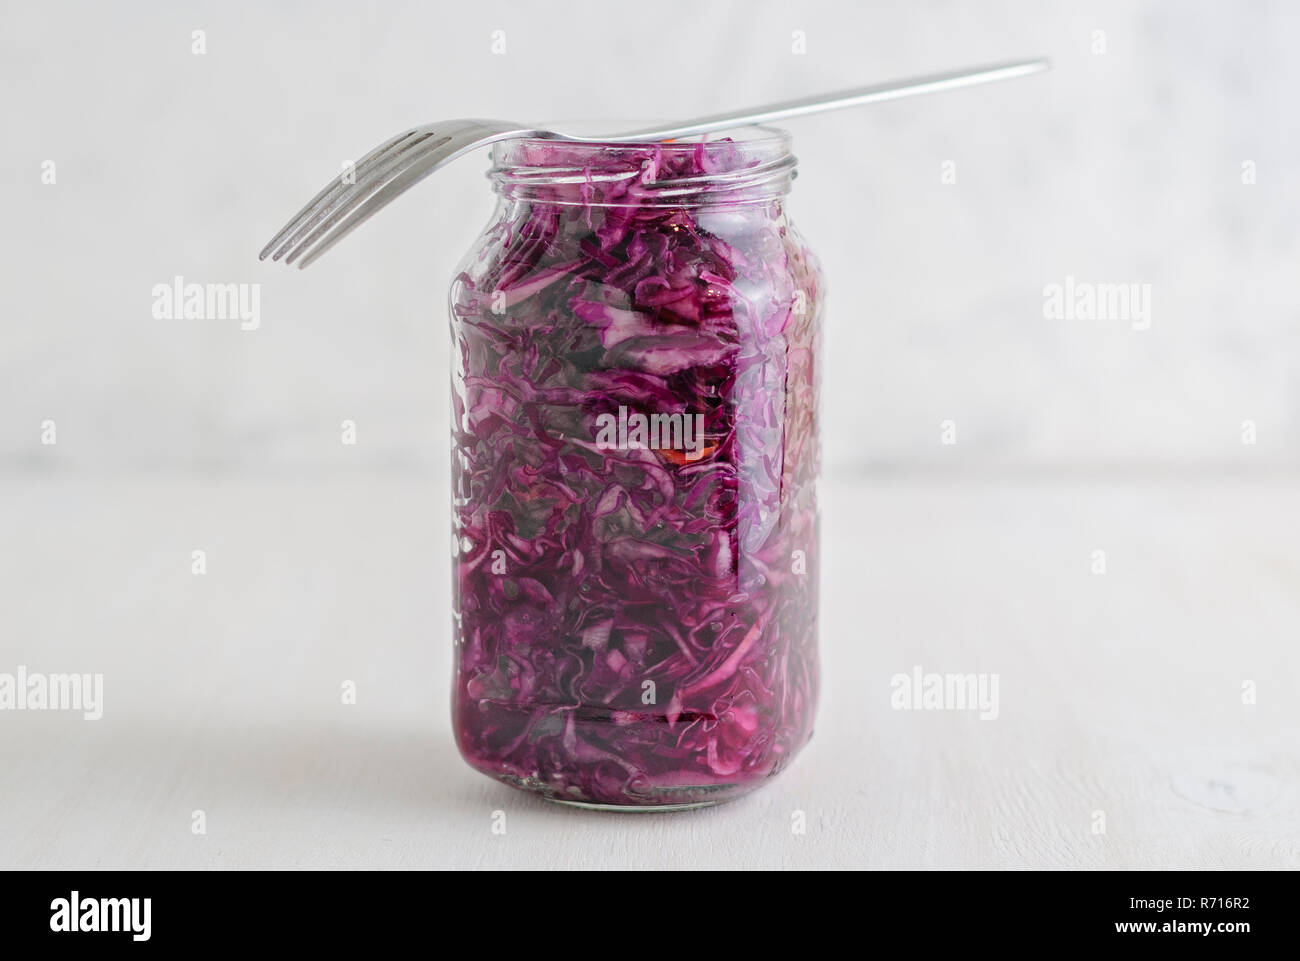 Glass jar of palatable purple fermented cabbage with fork standing on white background Stock Photo